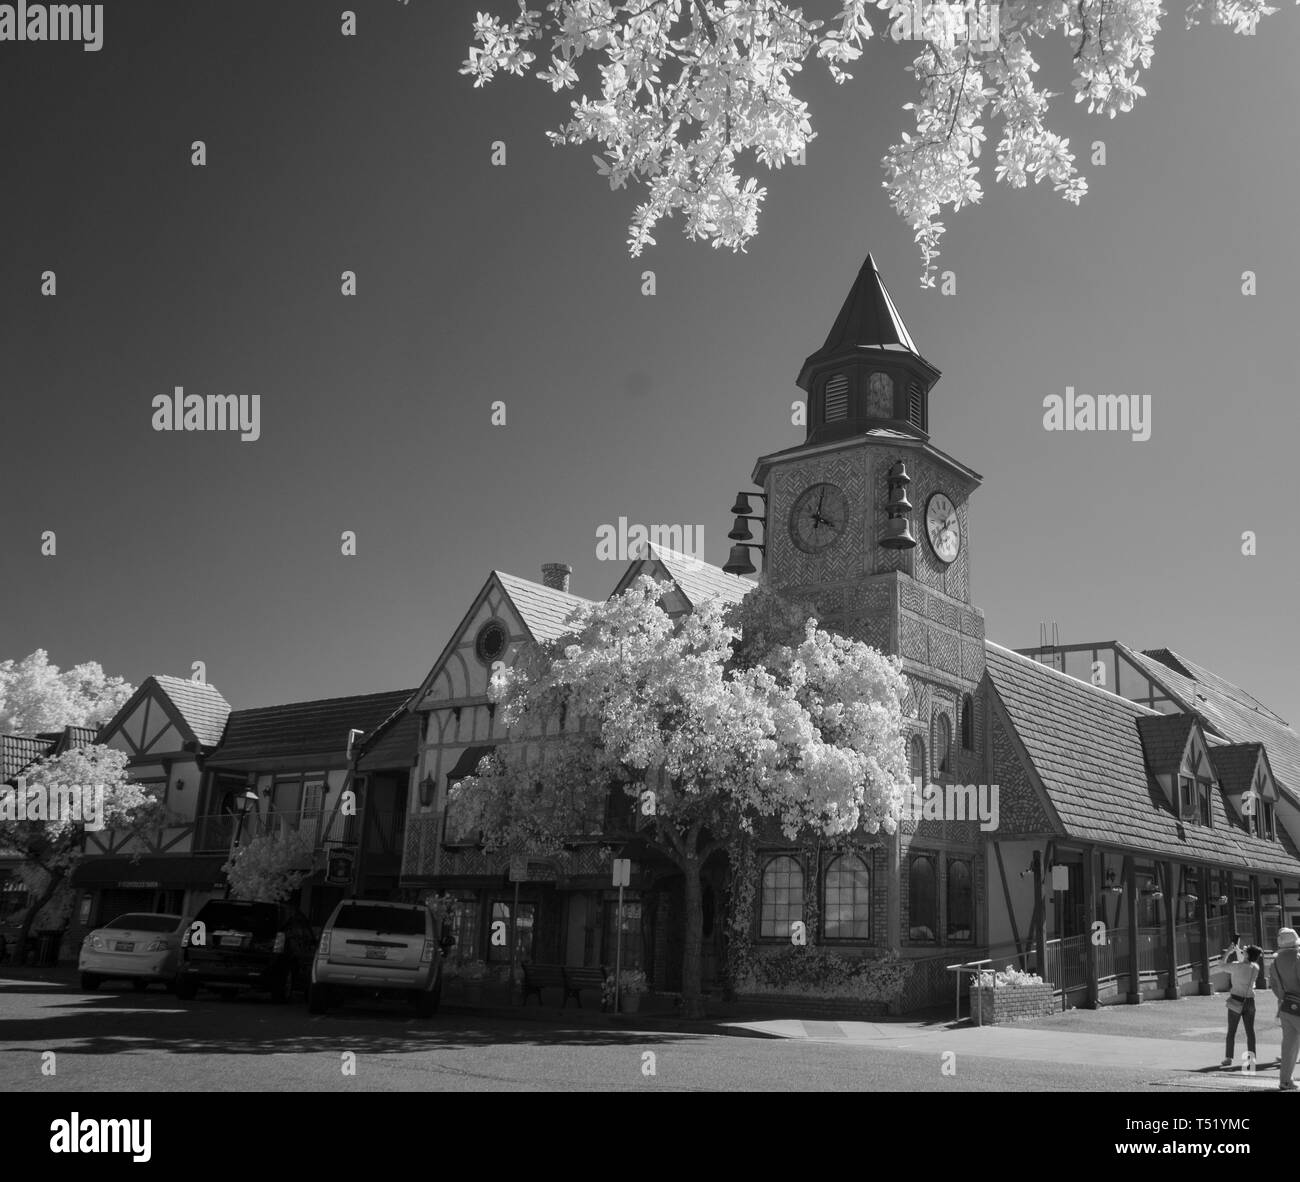 Black and white infrared, tourists , building with clock tower and cars parked on street, white foliage. Stock Photo